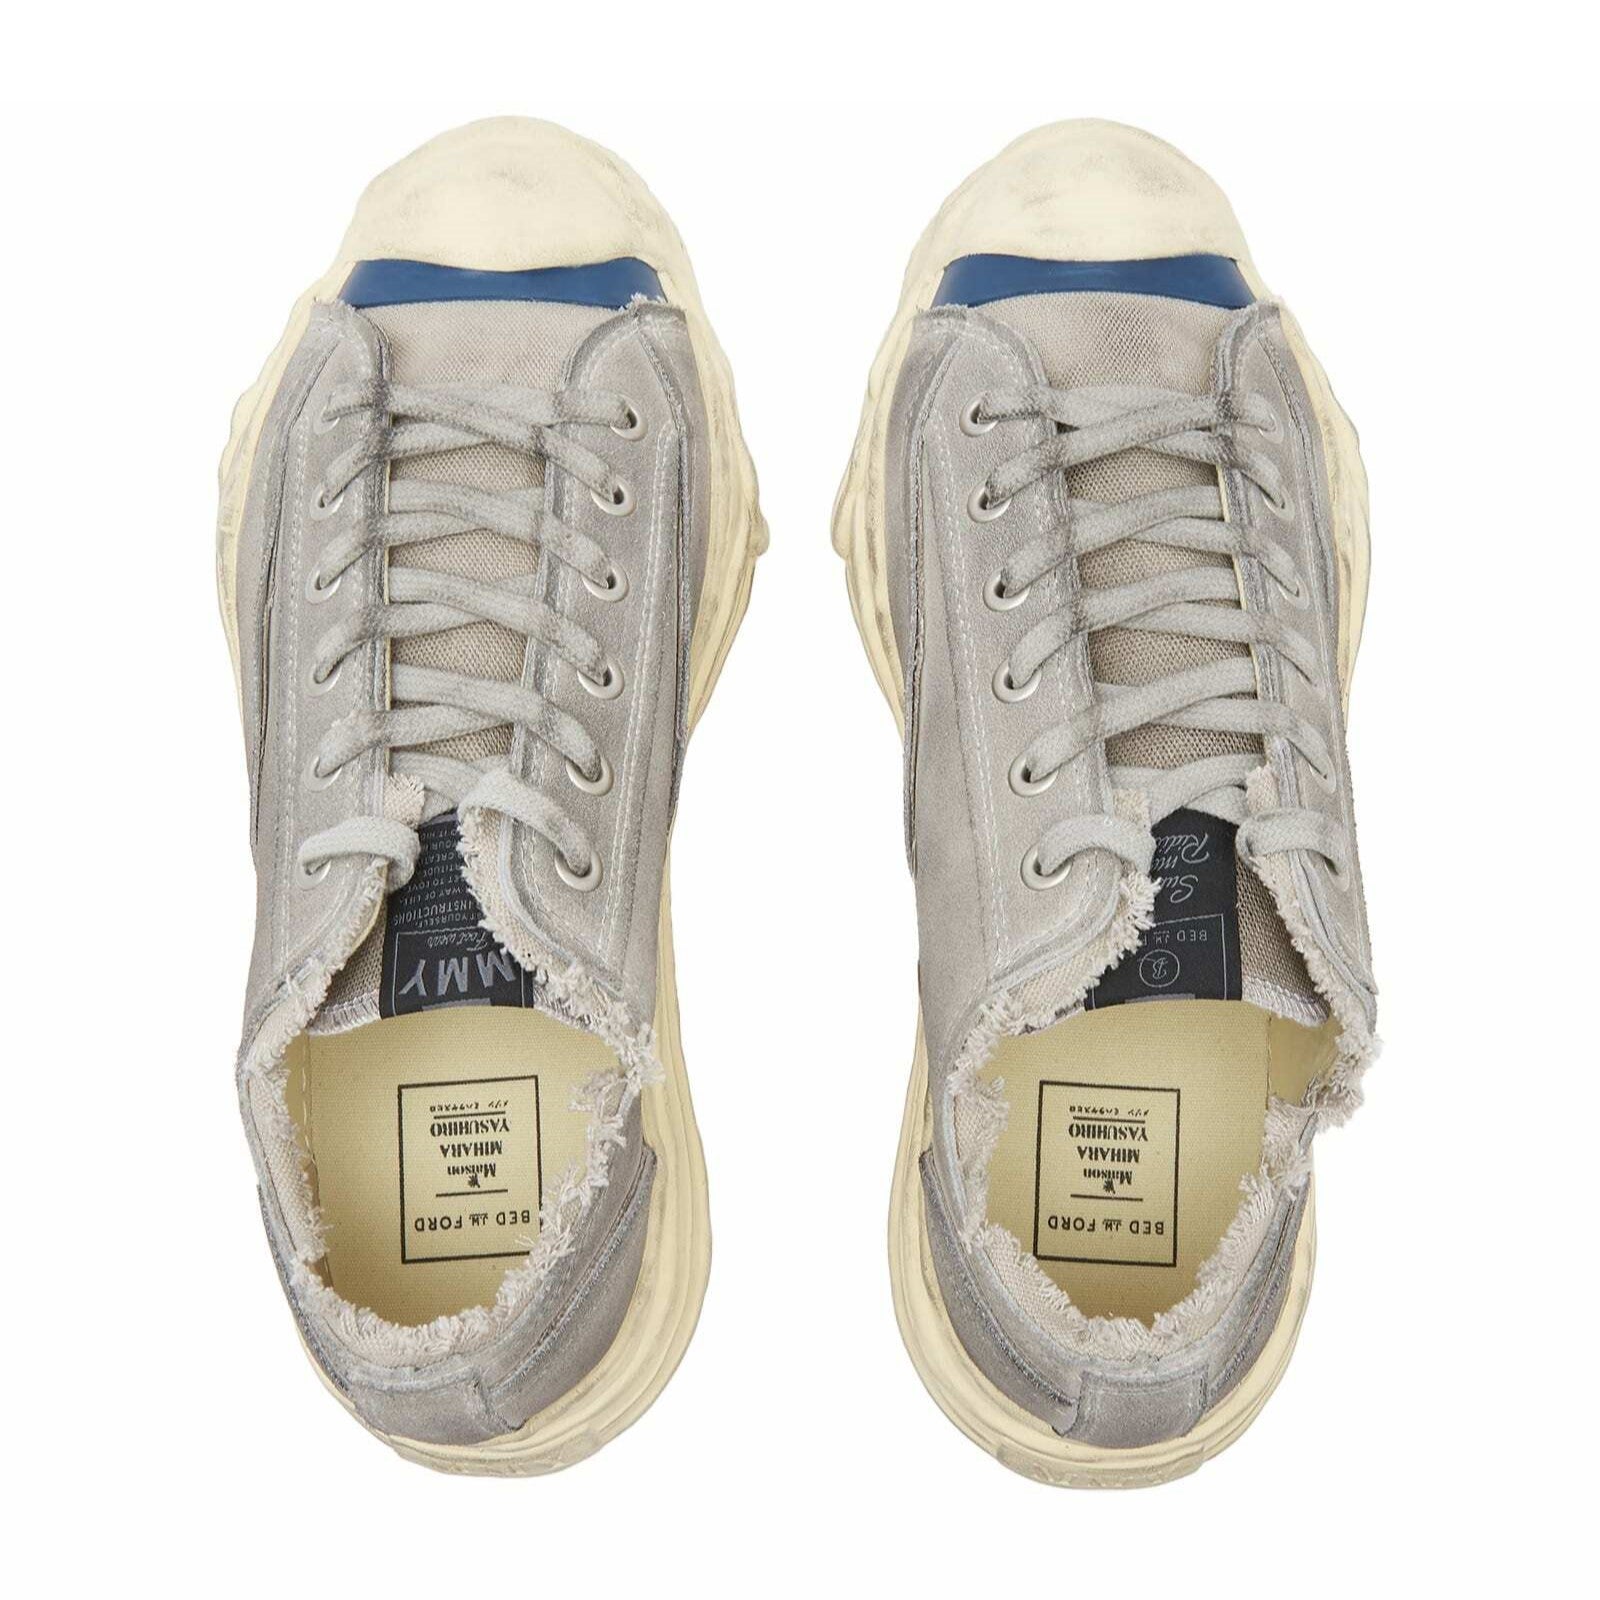 MMY x BED JW FORD "HANK" OG Sole Suede Low-top Sneaker